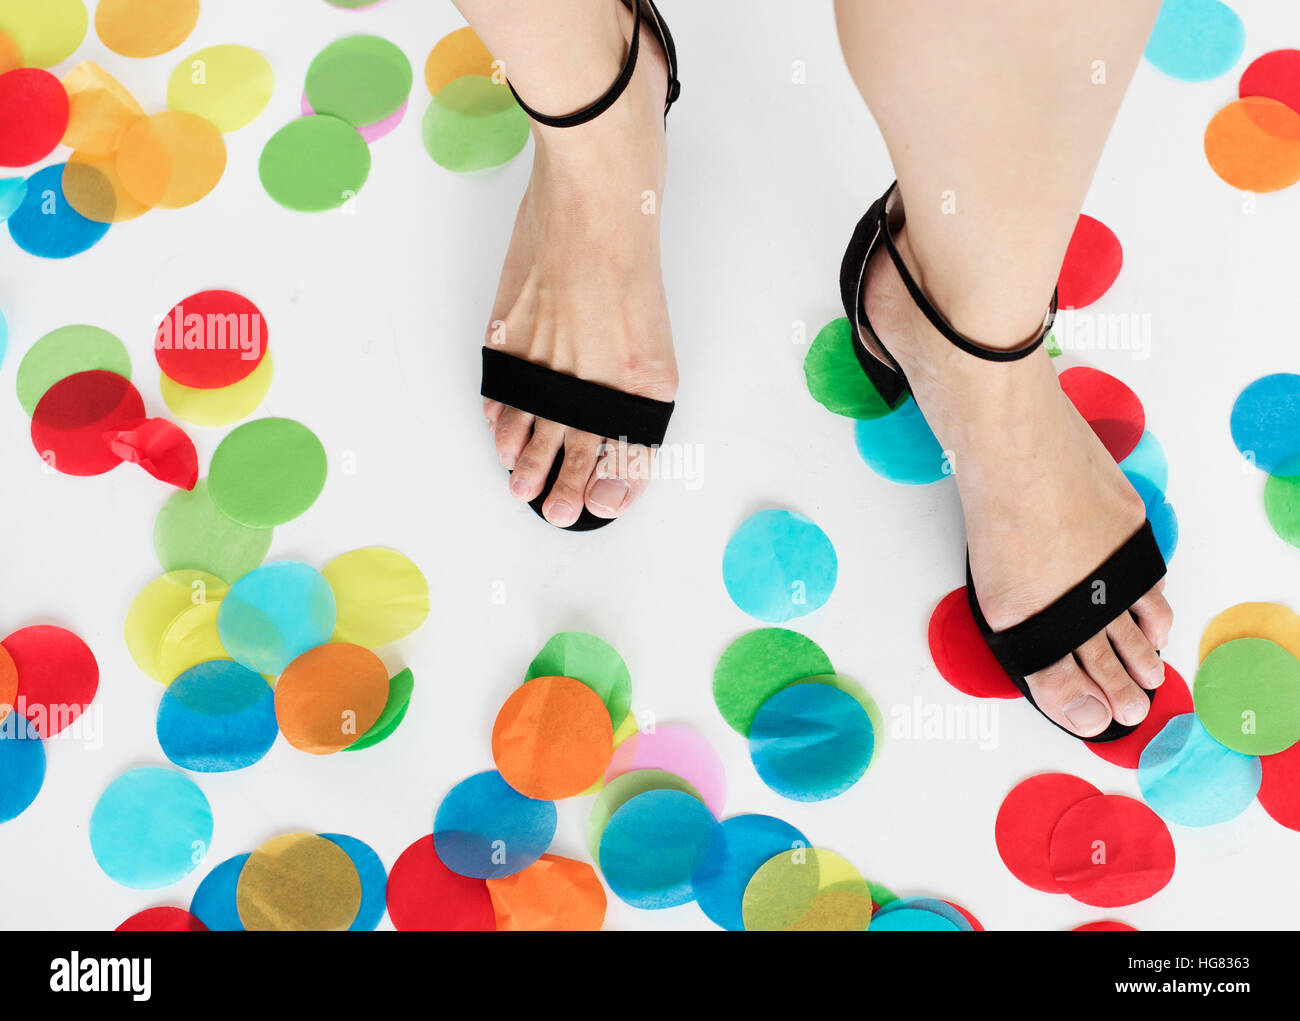 Human Leg Feet Standing Shoes Colorful Concept Stock Photo